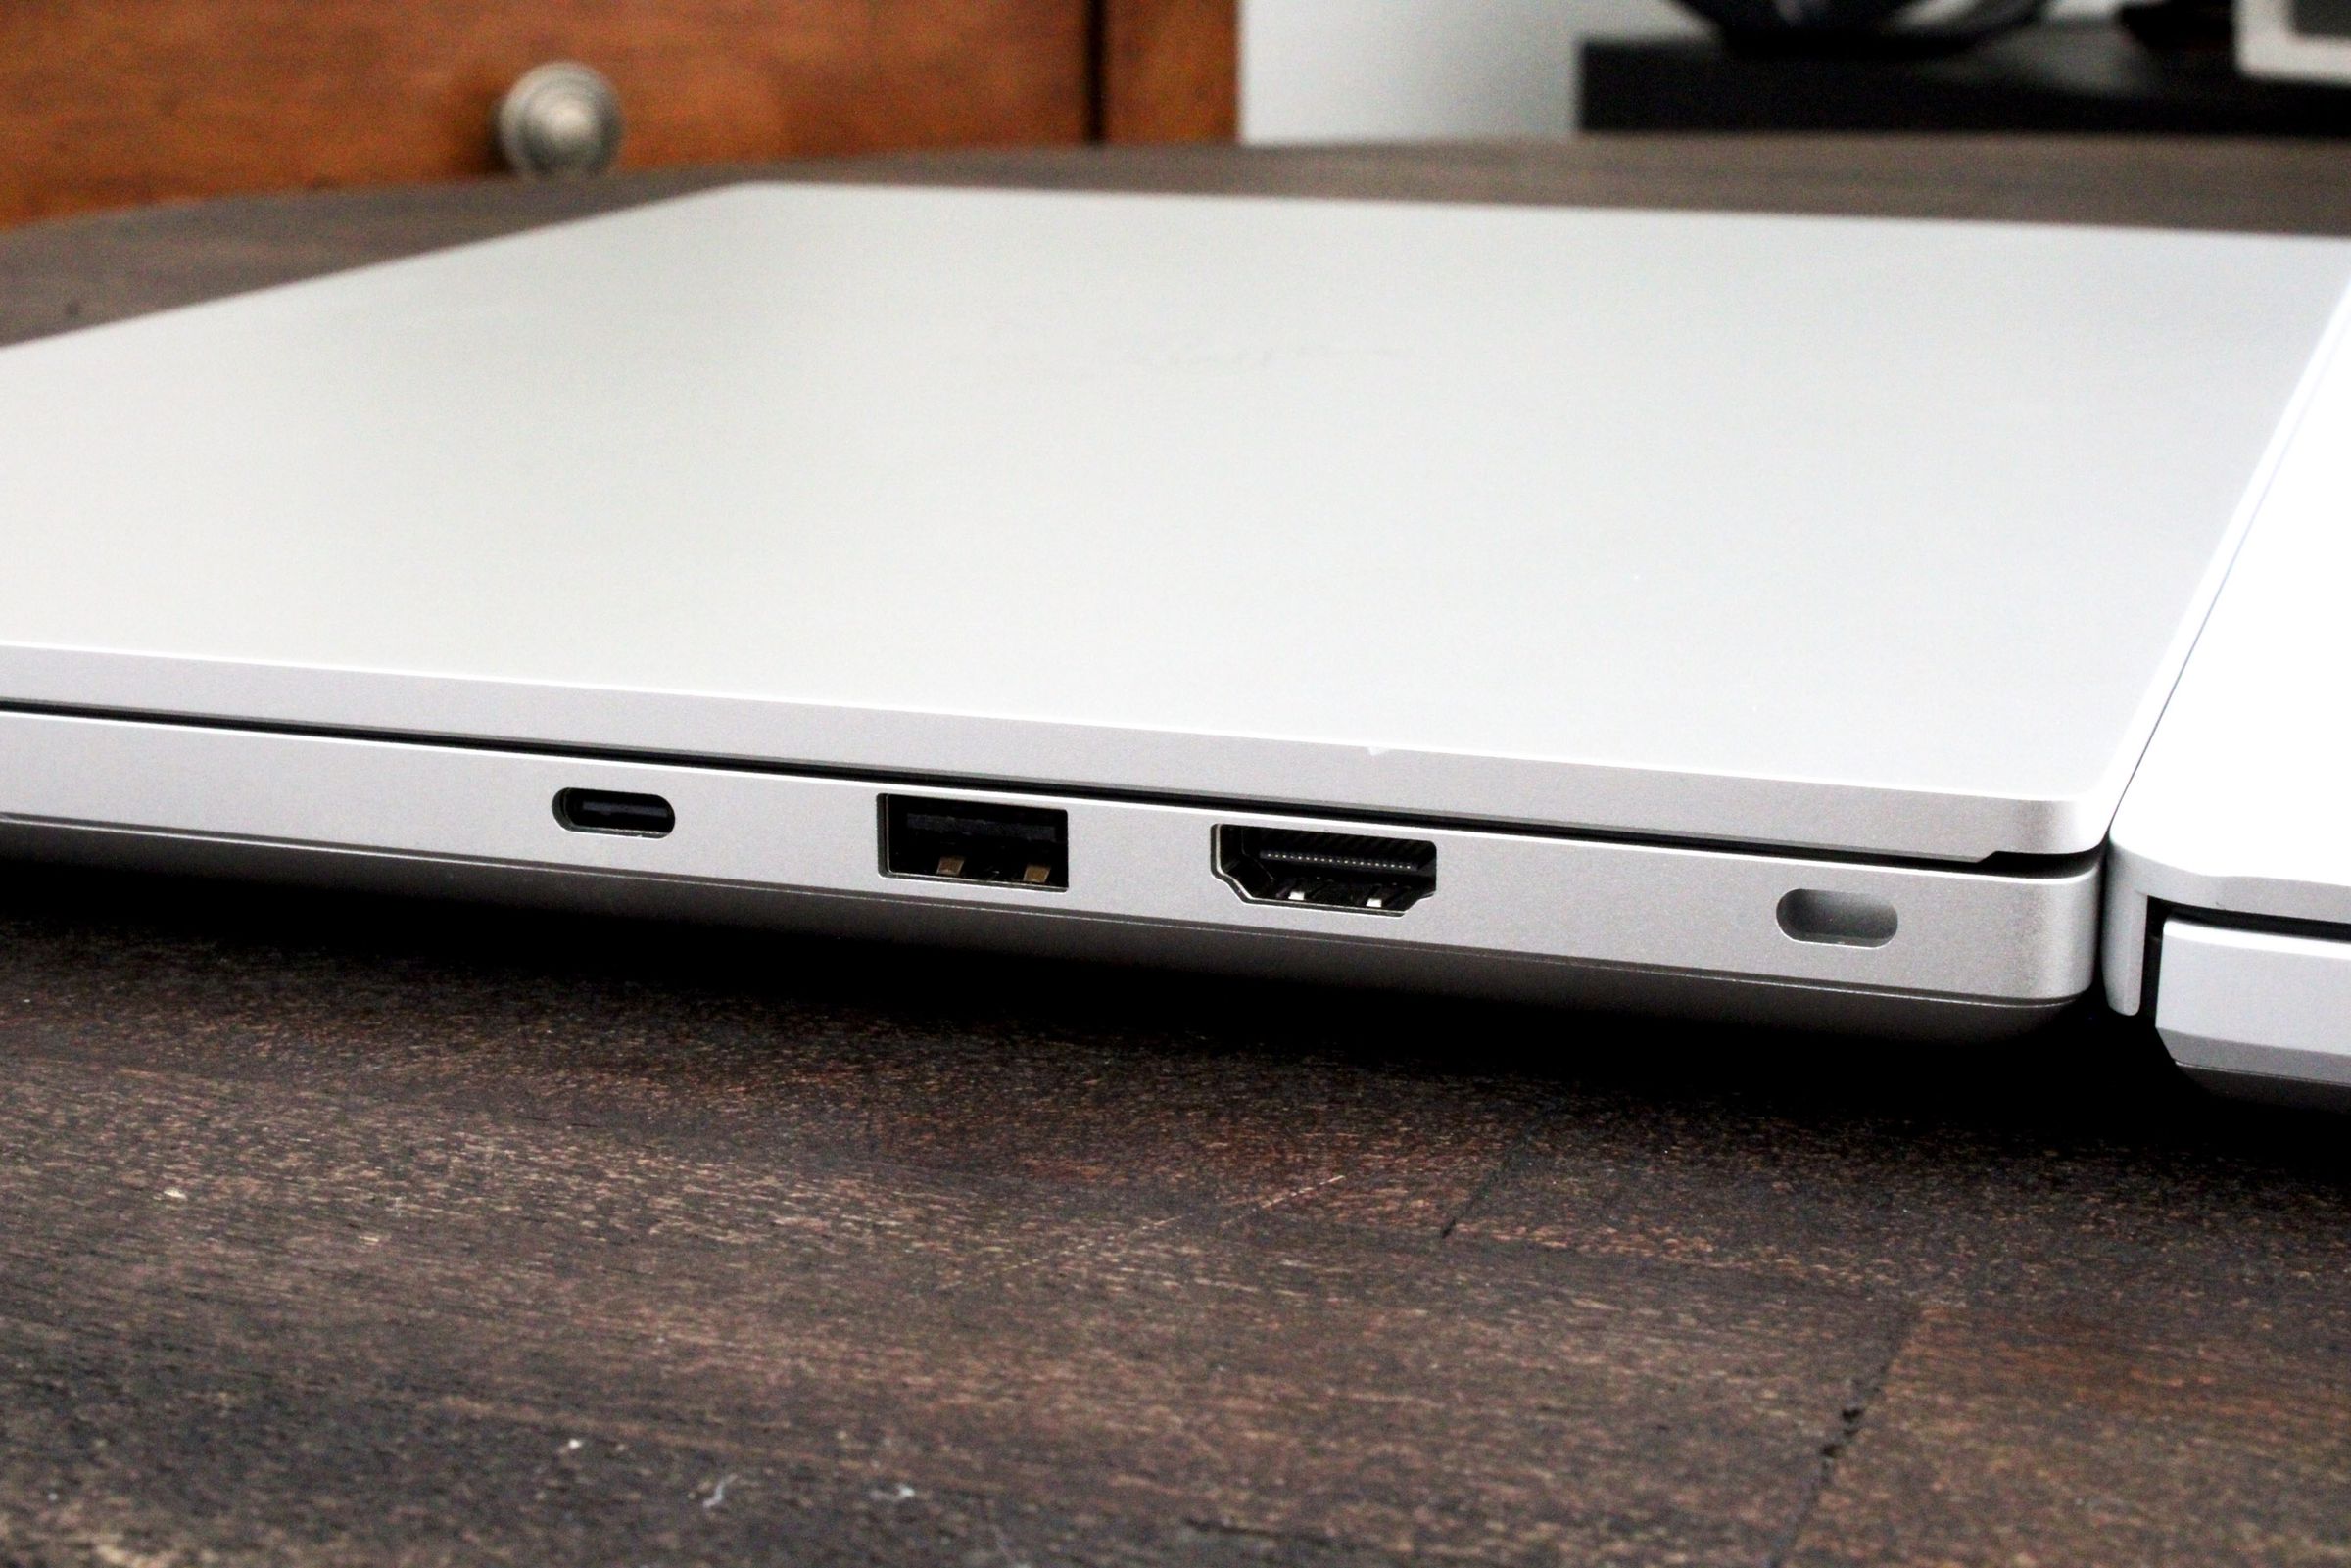 A close-up of a few connectivity ports on the side of a silver laptop.